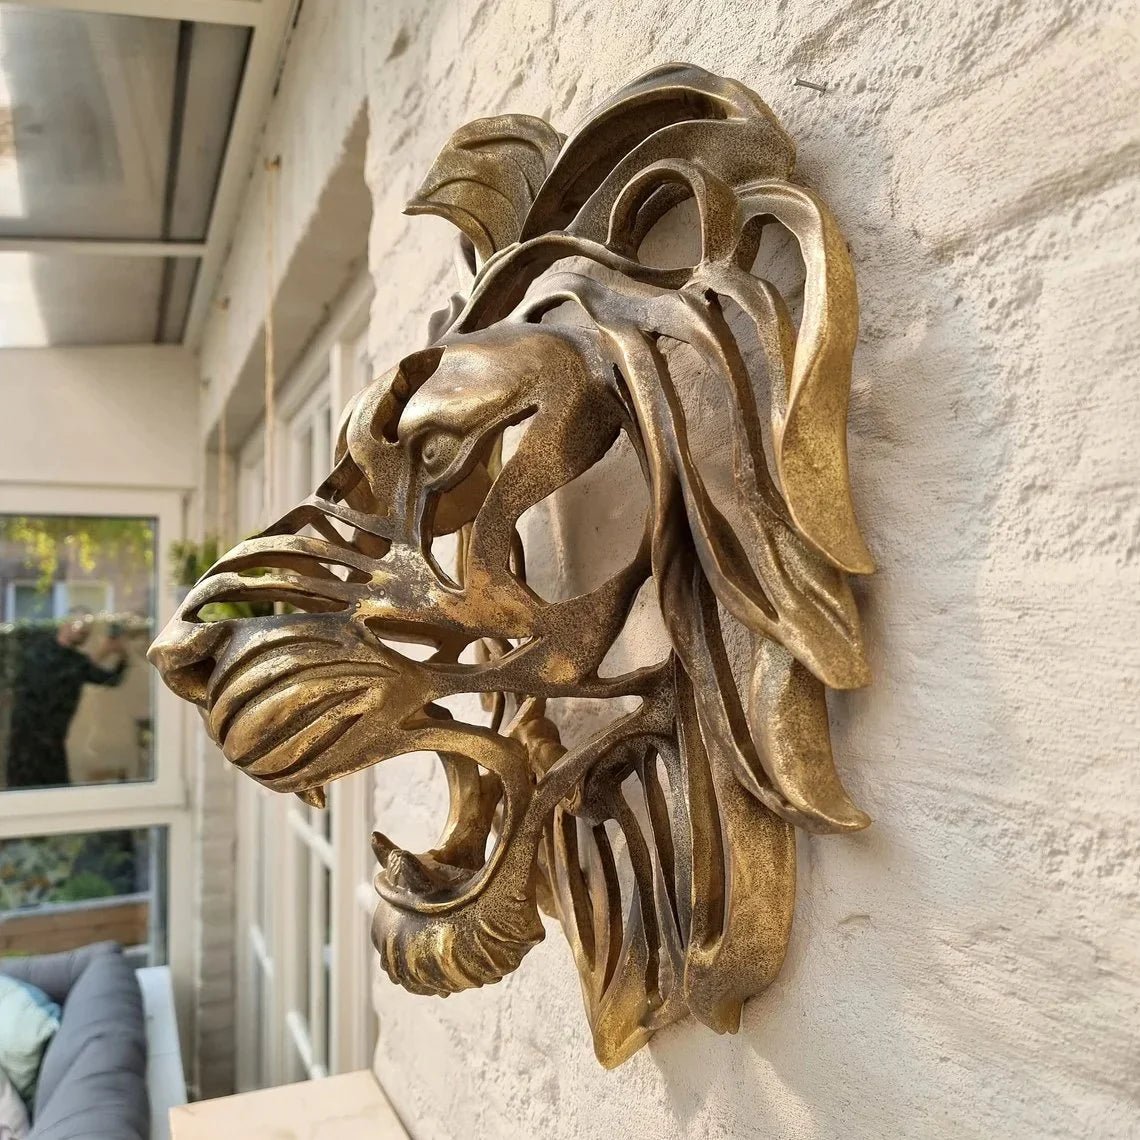 💥LAST DAY -49%OFF💥 - Rare Find-Large Lion Head Wall Mounted Art Sculpture🎁